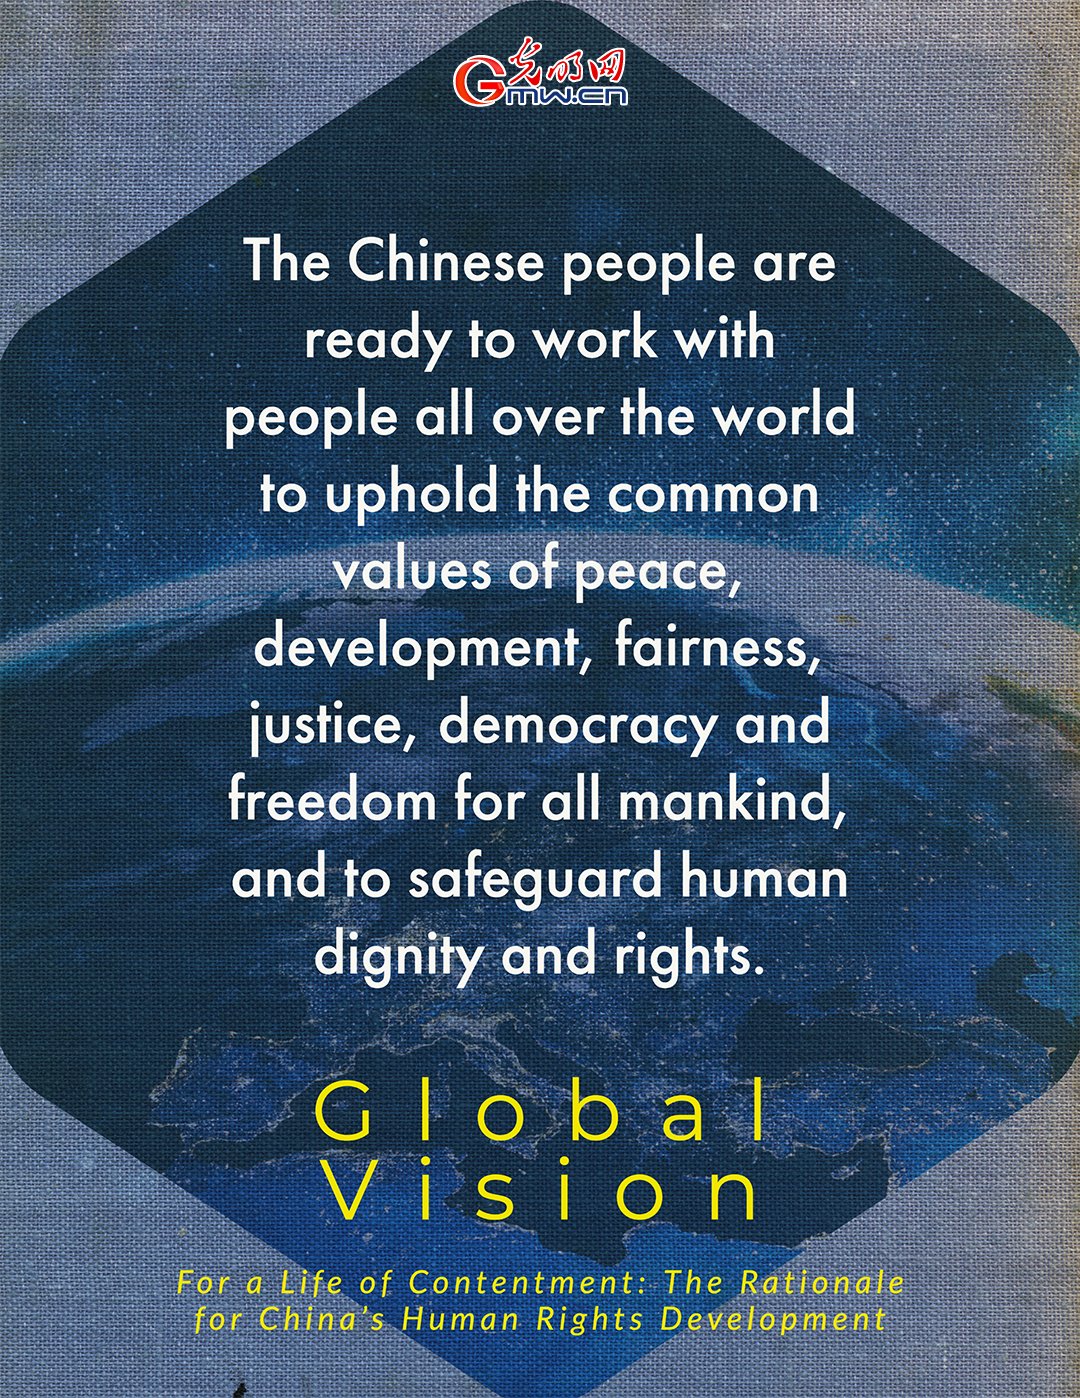 The Rationale and Global Vision of China’s Human Rights Development